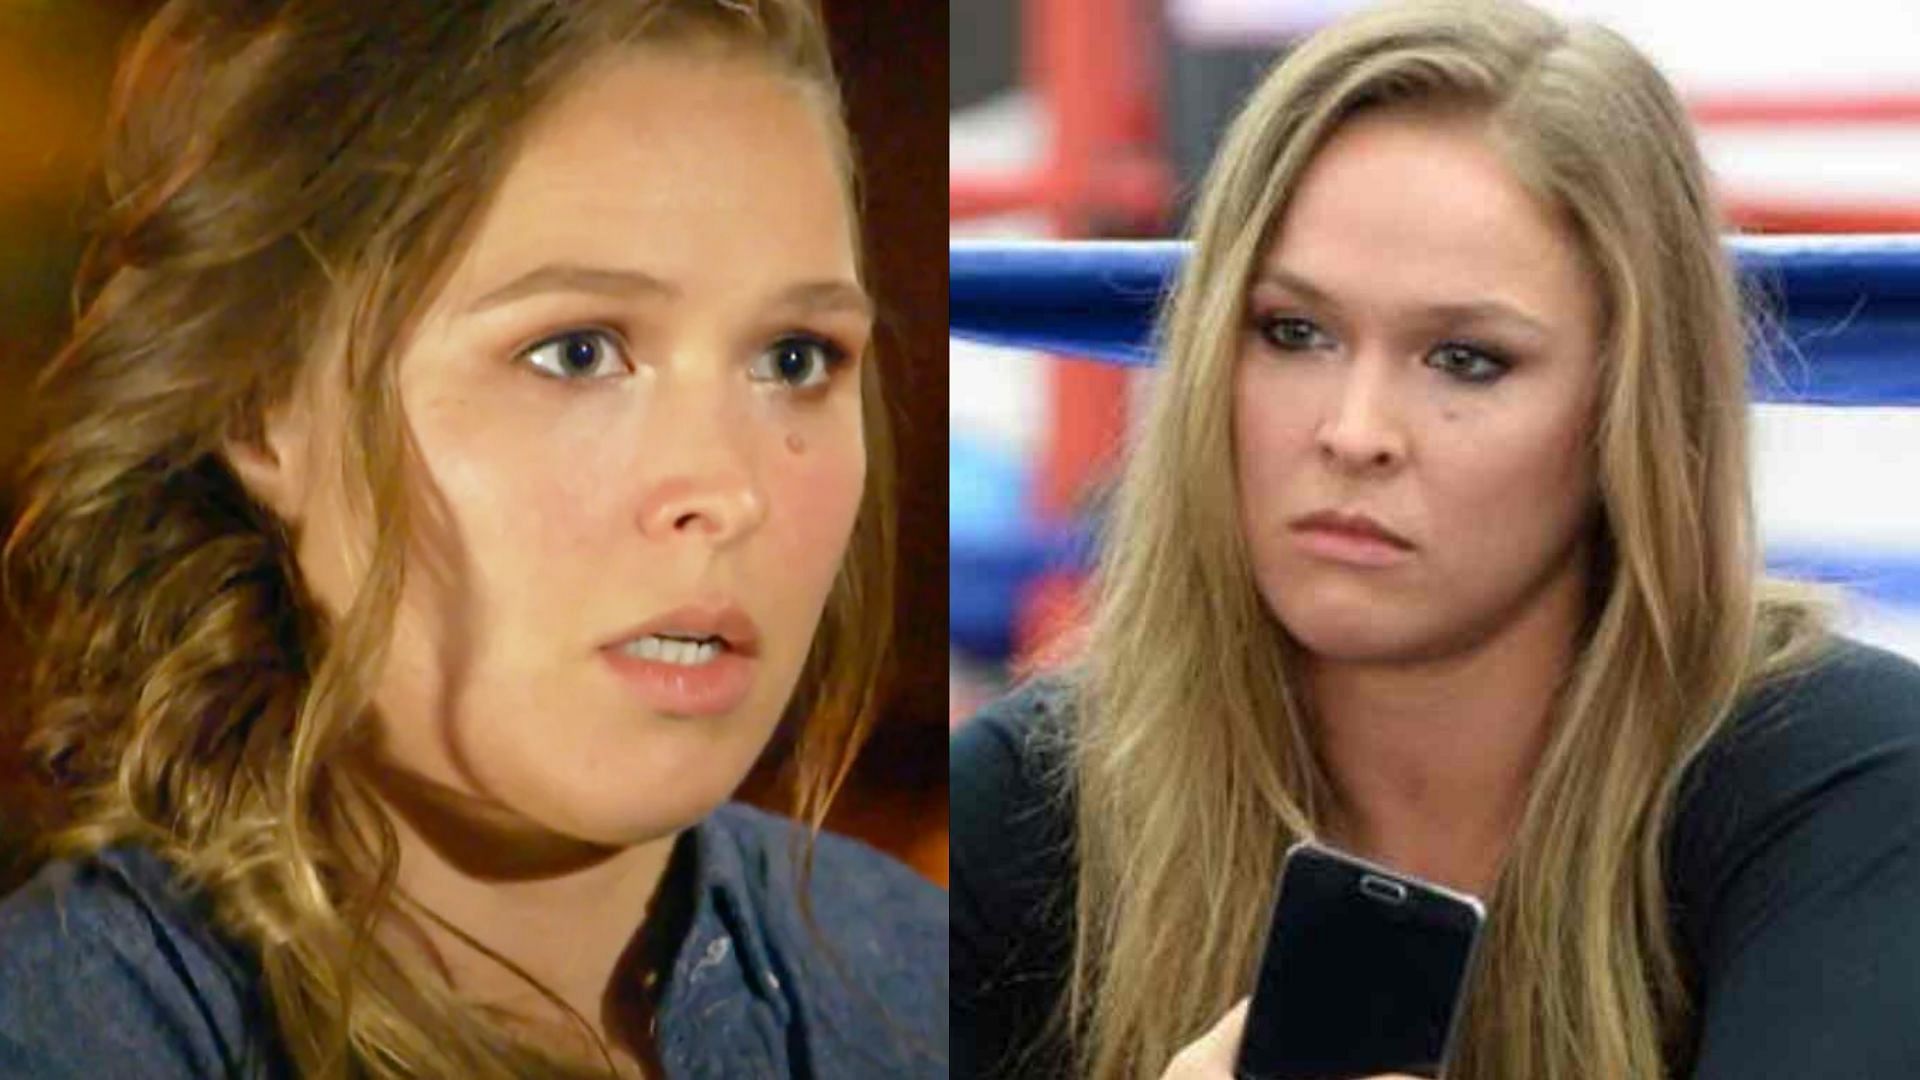 Ronda Rousey is not well loved in the wrestling community